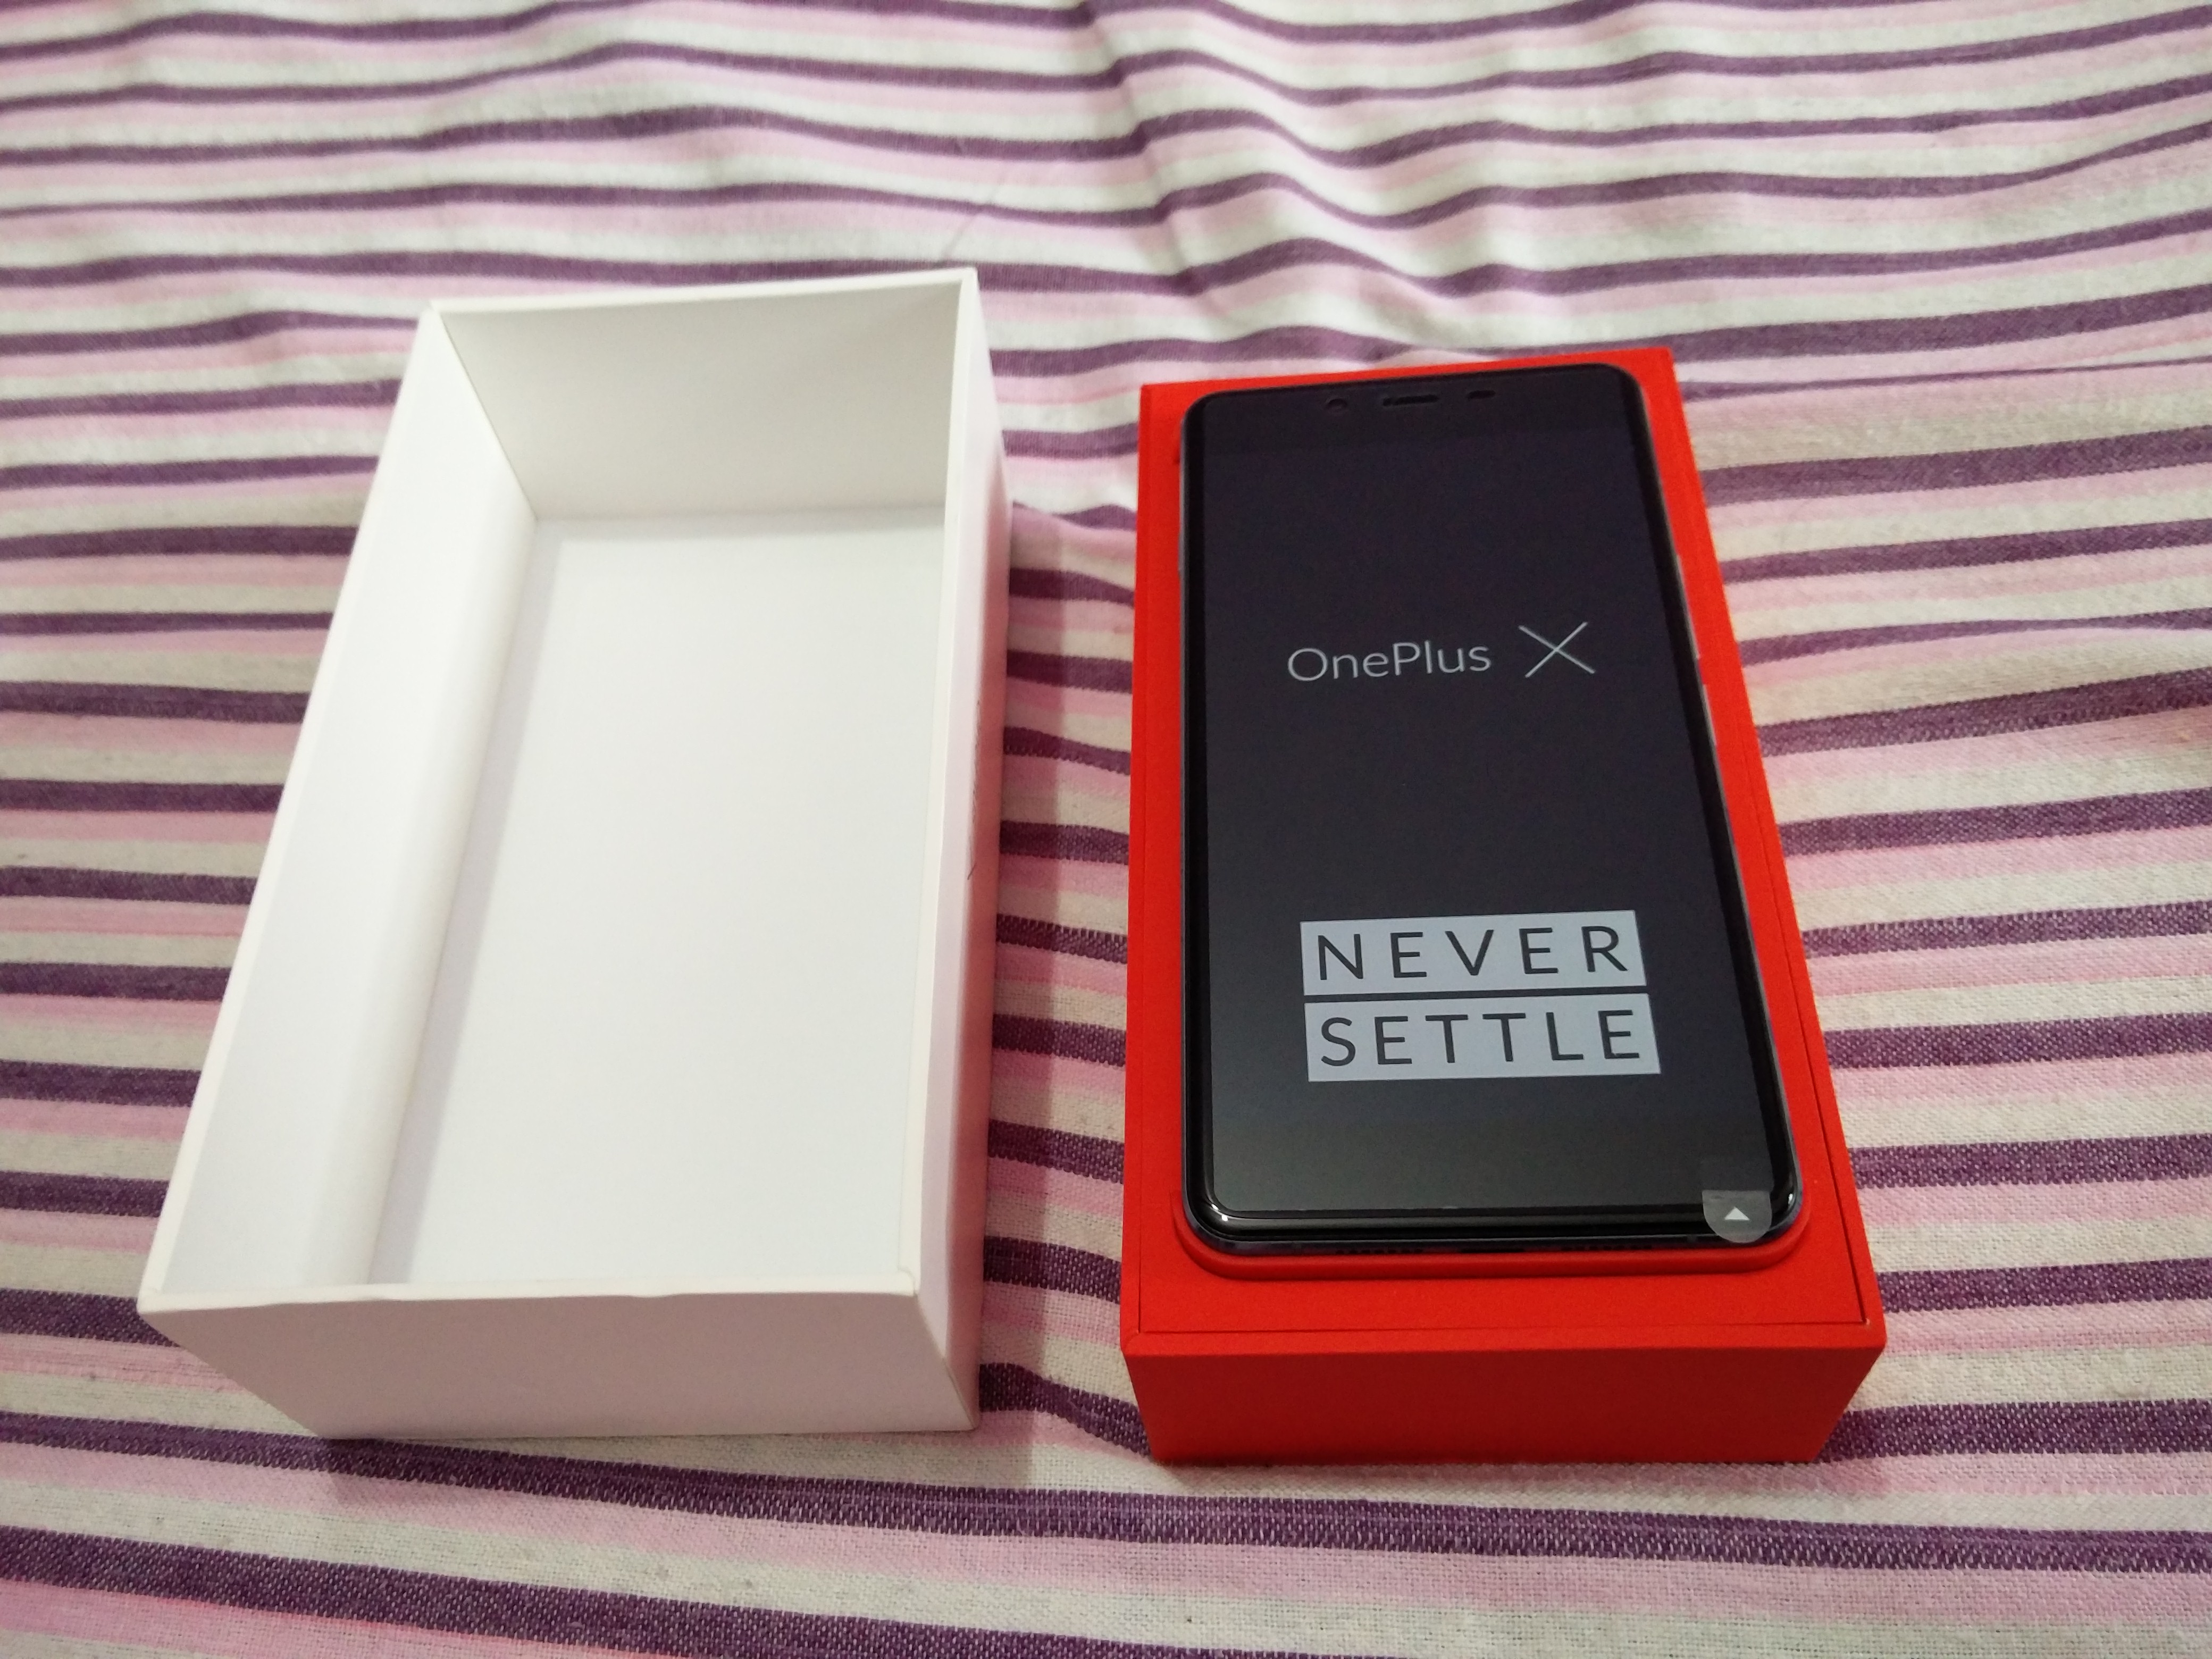 OnePlus X as in the box